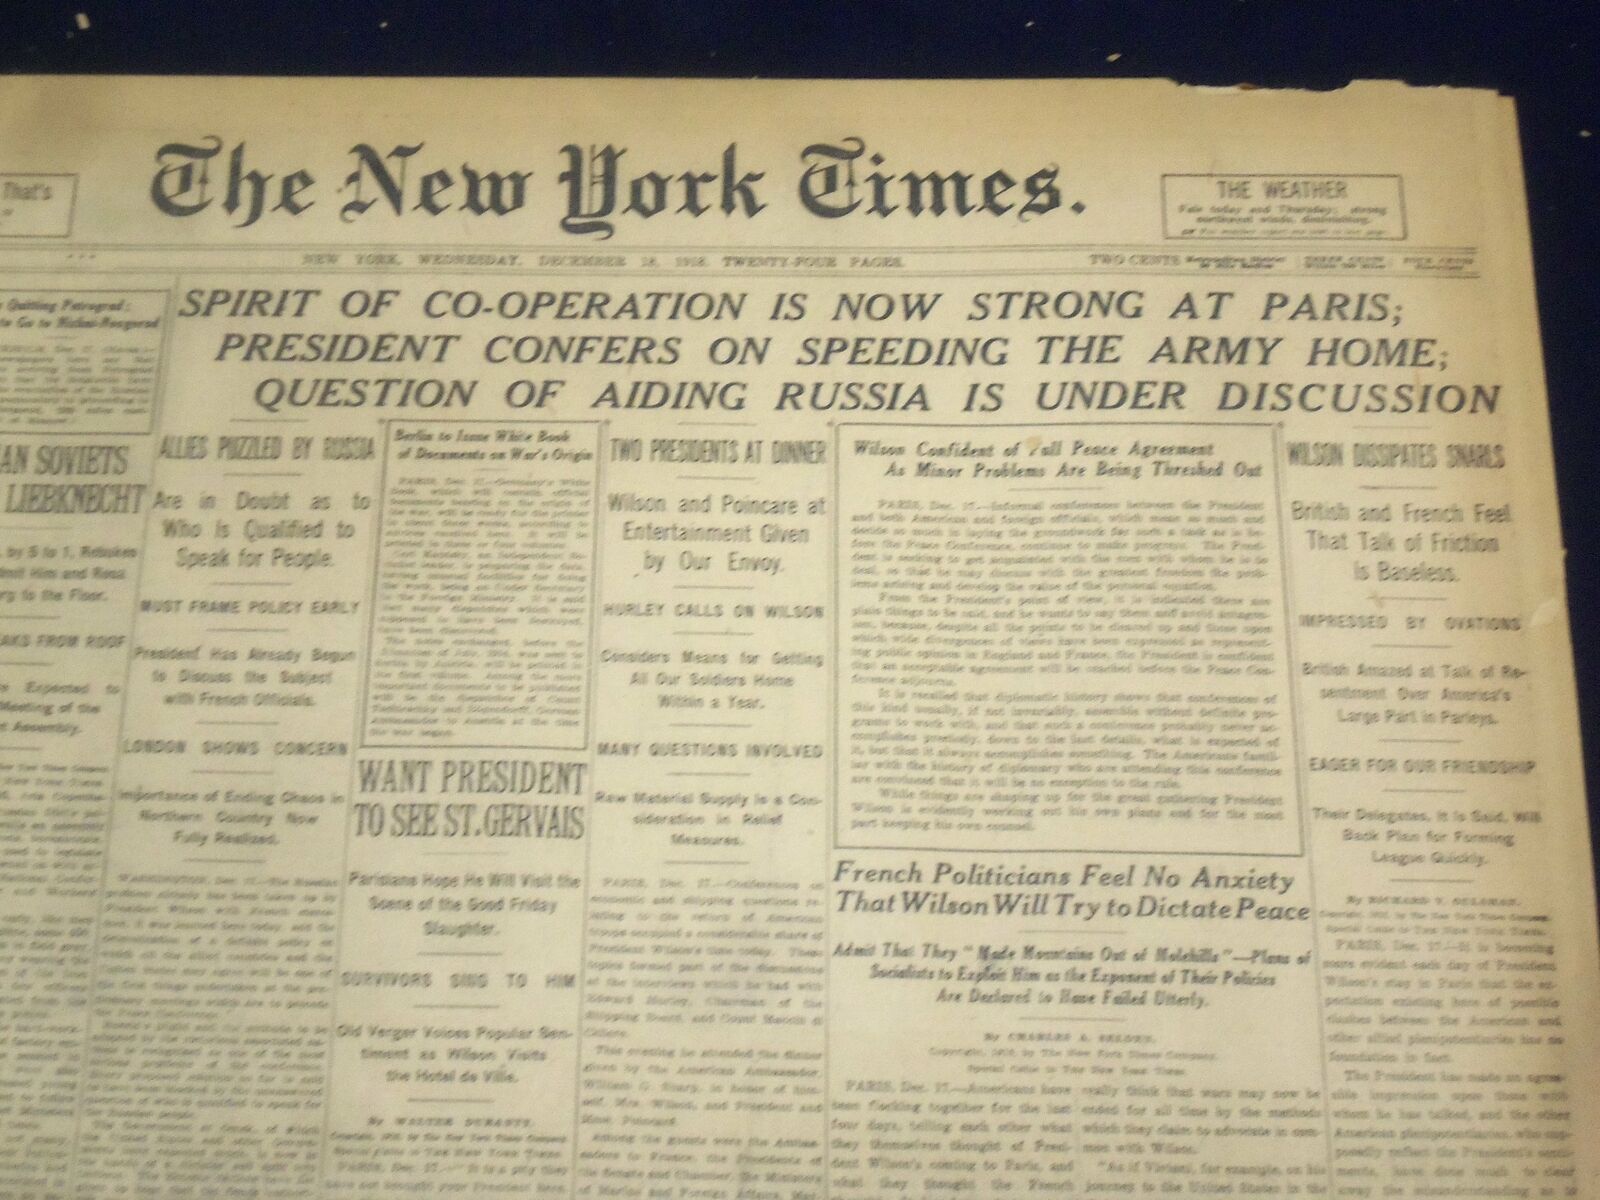 1918 DECEMBER 18 NEW YORK TIMES - CO-OPERATION STRONG AT PARIS - NT 9183